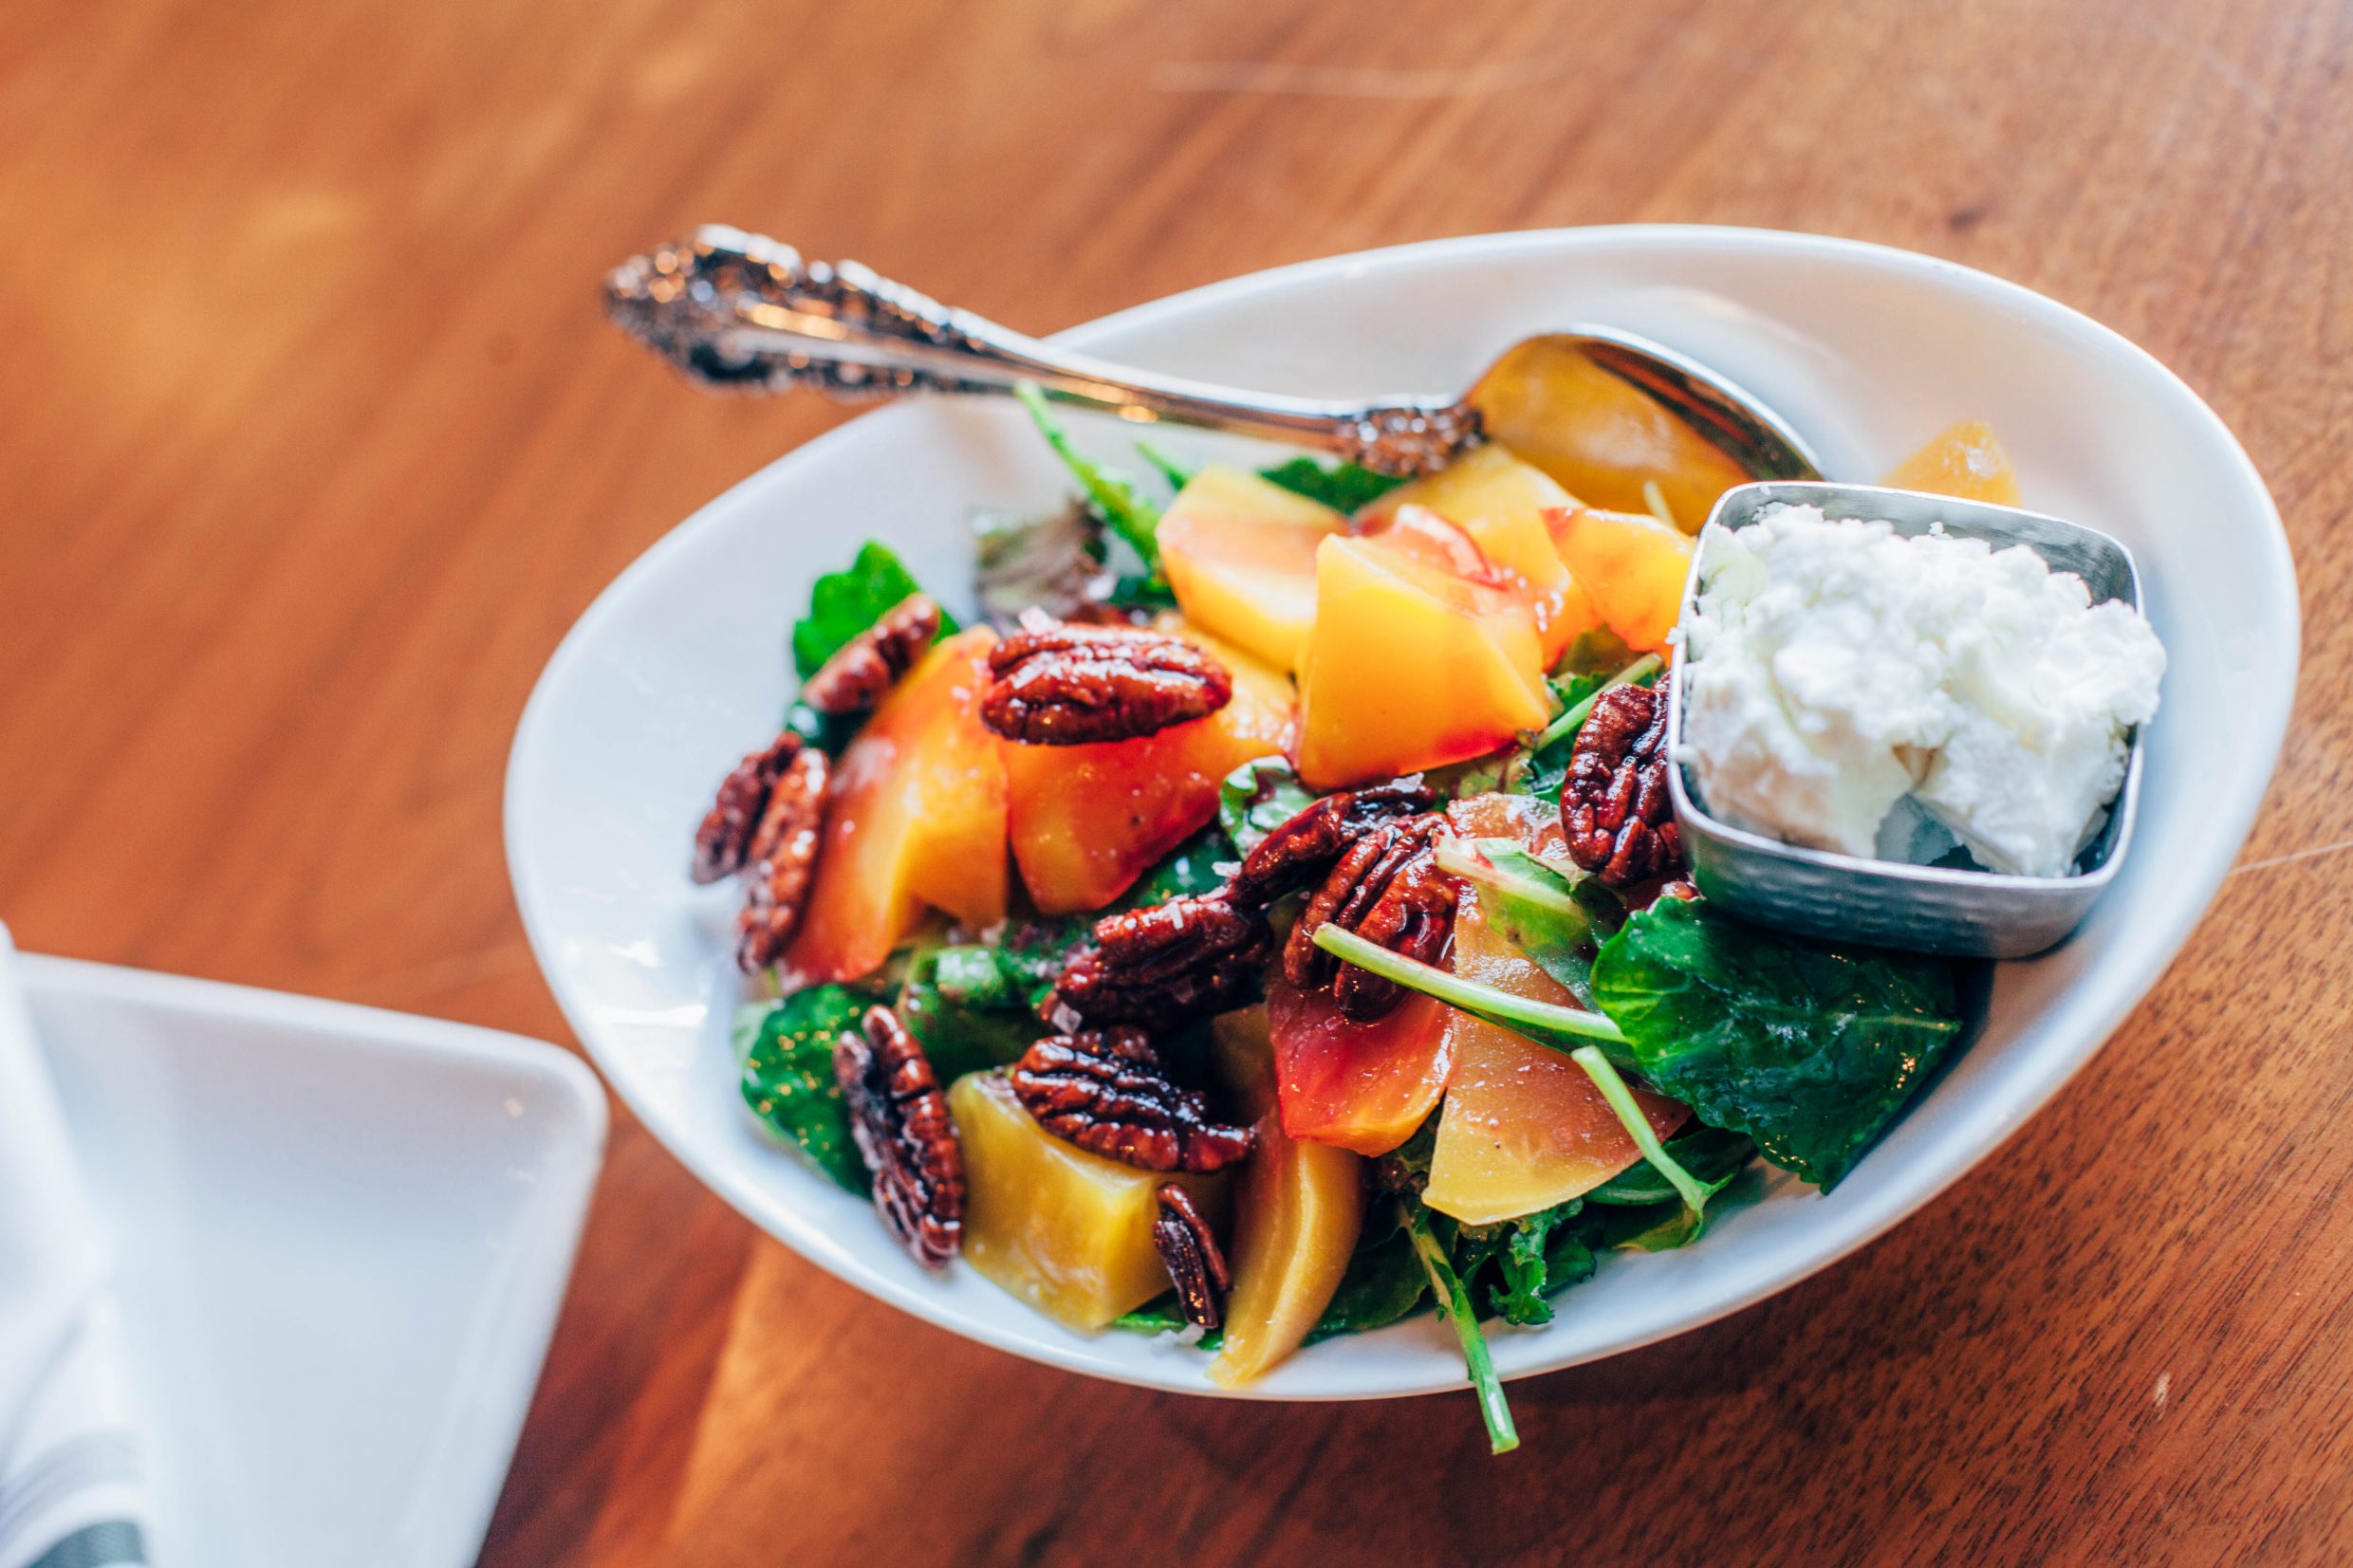 Tredici Enoteca - Roasted beet salad | A weekend in Washington, D.C. | Travel and Food Guide